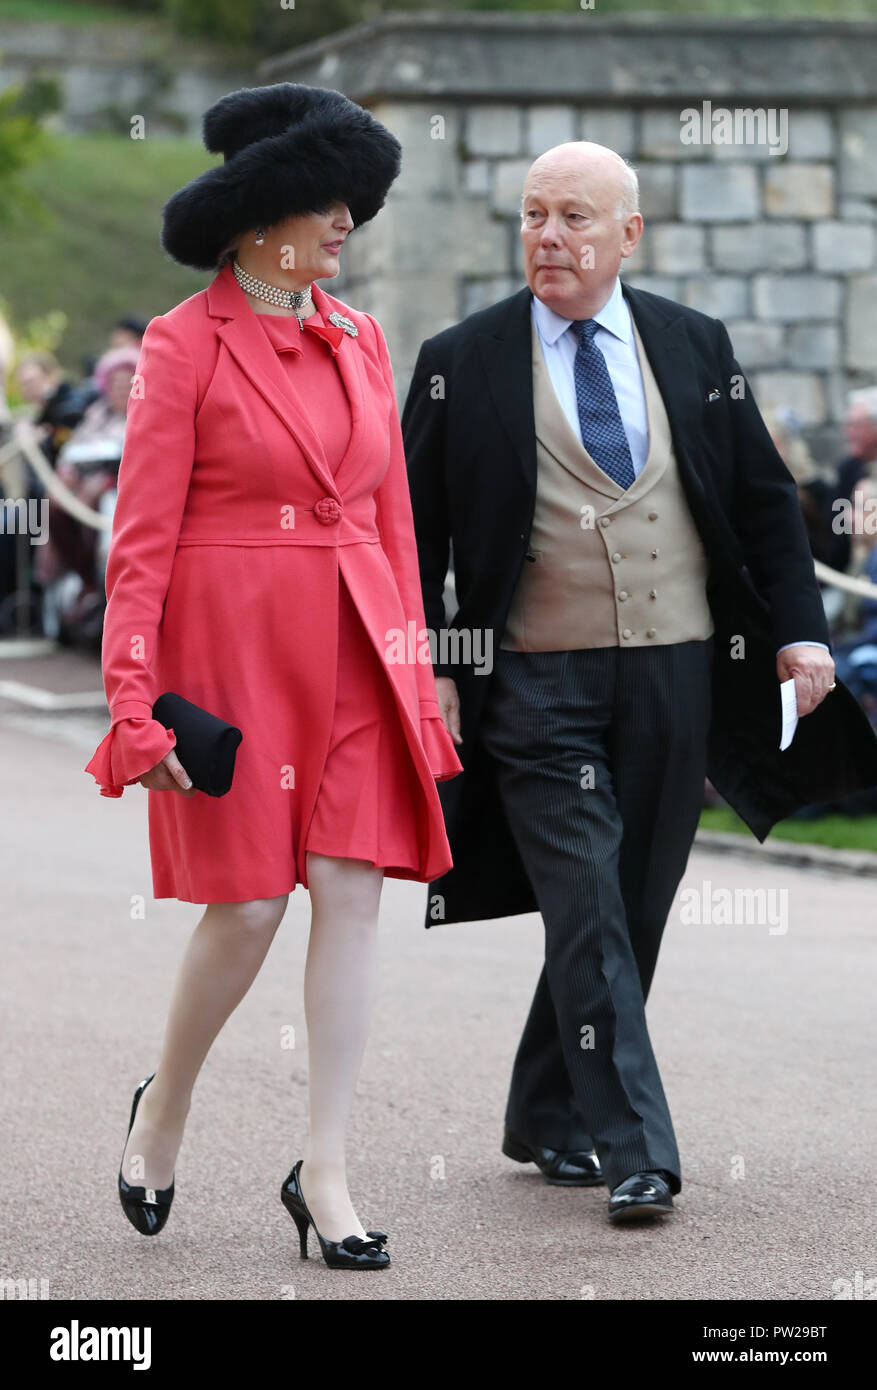 Emma Joy Kitchener and Julian Fellowes arrive at the grounds of Windsor  Castle during the wedding of Princess Eugenie to Jack Brooksbank at St  George's Chapel in Windsor Castle Stock Photo -